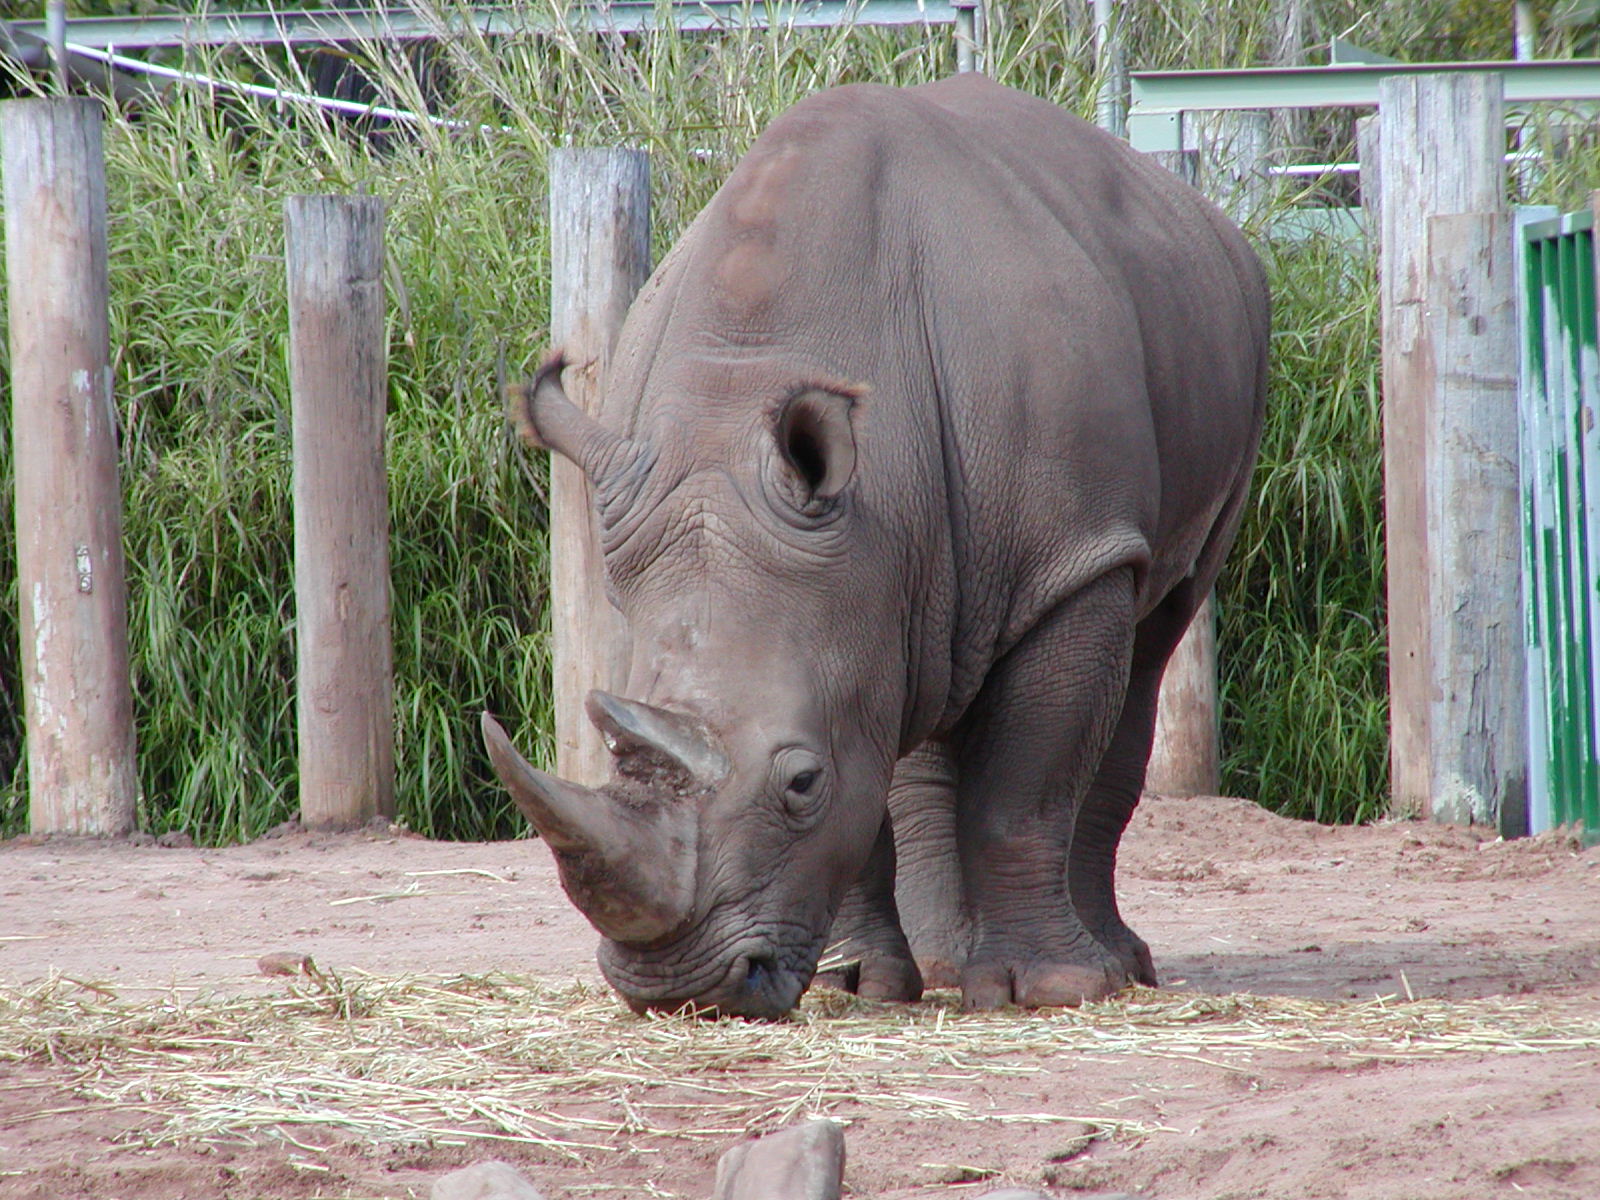 an adult rhino eating hay in the dirt